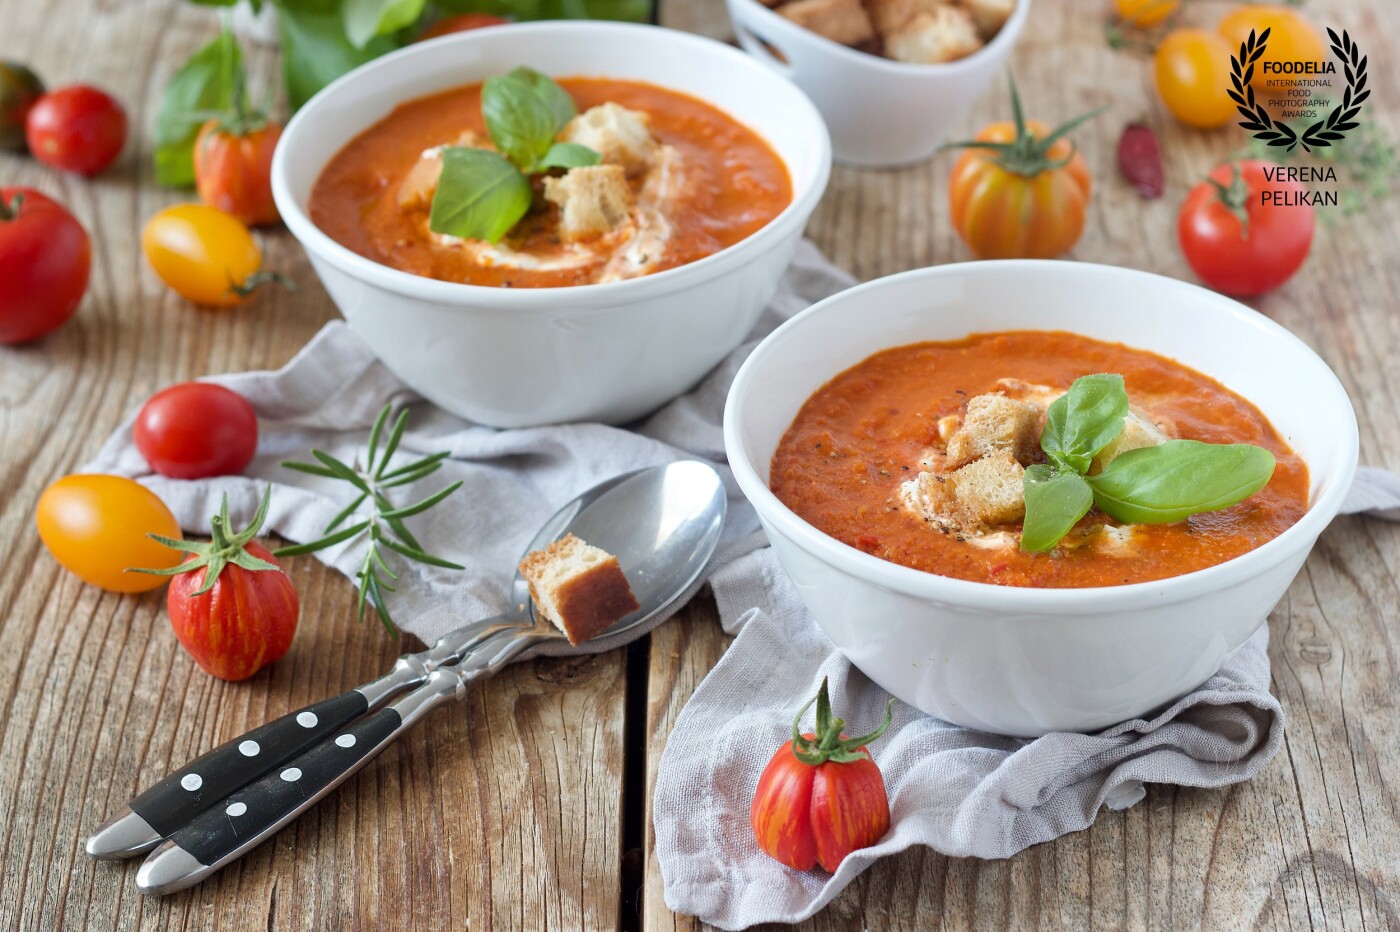 Tomato soup recipe. This fresh and simple tomato soup is perfect for using up a glut of home- grown tomatoes. <br />
Recipe can be found on my website: https://www.sweetsandlifestyle.com/rezept/tomatensuppe-paradeisersuppe/